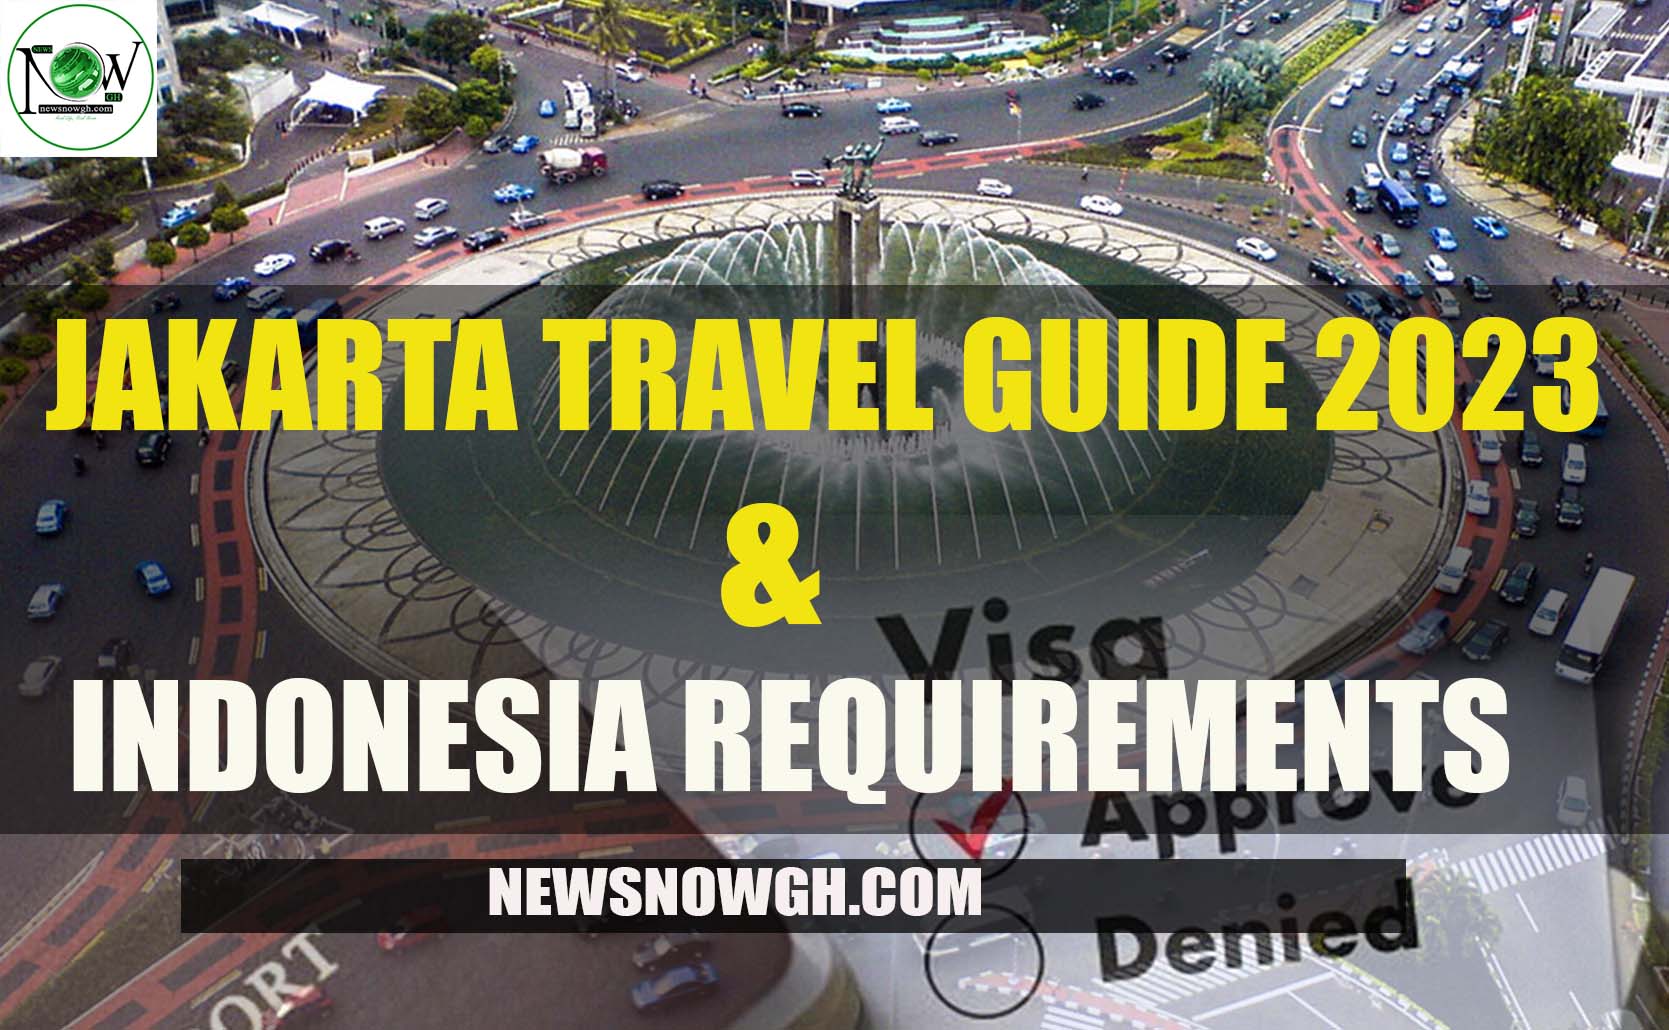 Jakarta Travel Guide 2023 & Indonesia Requirements